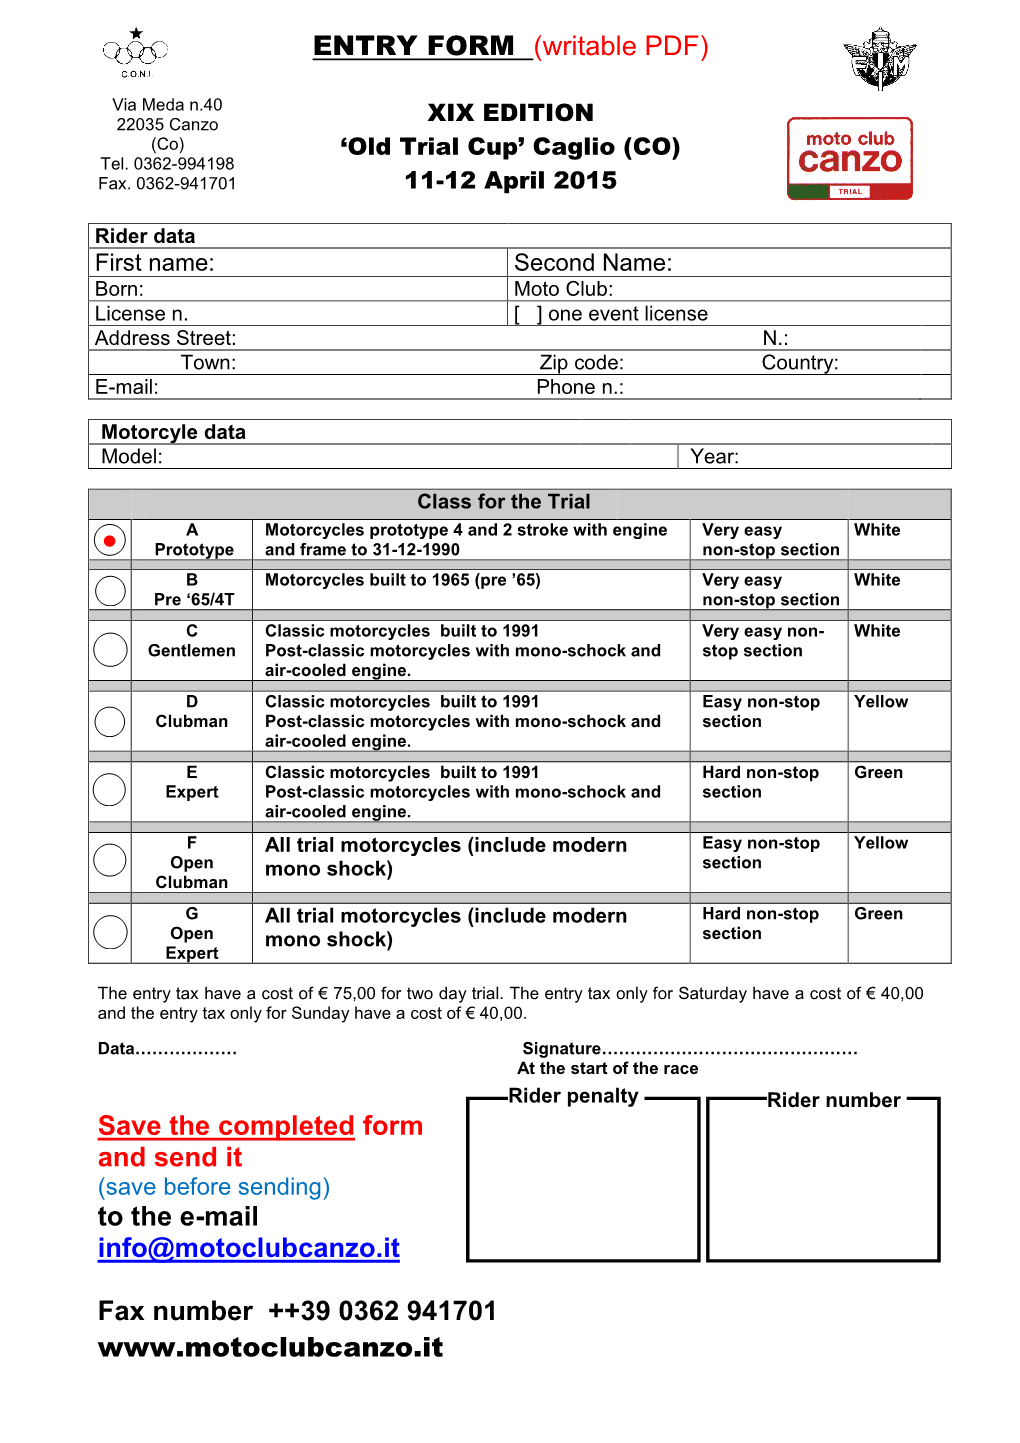 ENTRY FORM (Writable PDF) Save the Completed